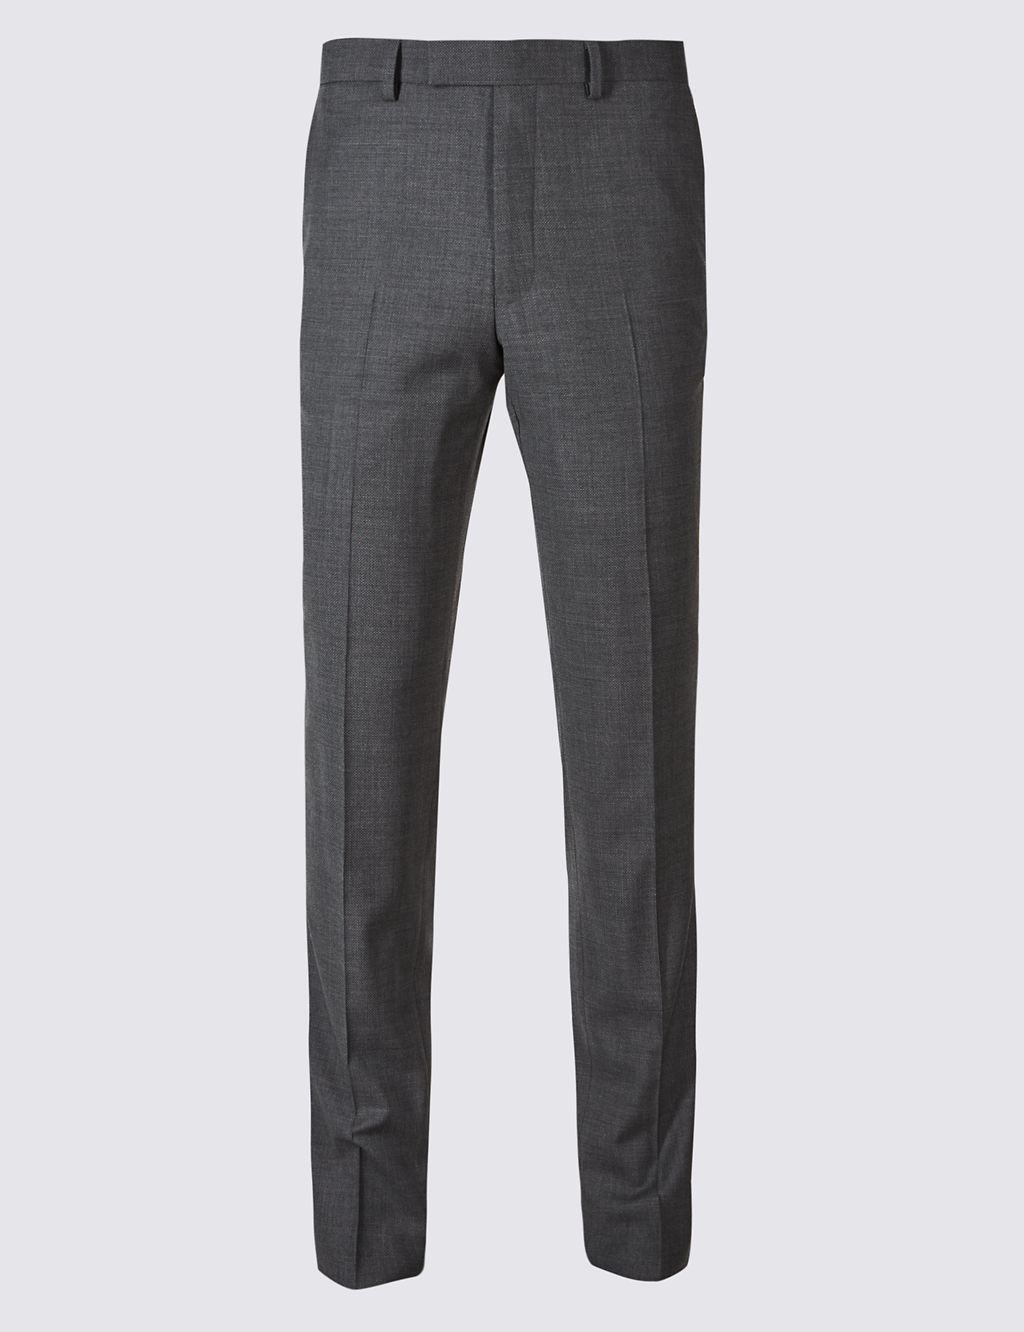 Charcoal Textured Slim Fit Wool Trousers 1 of 7